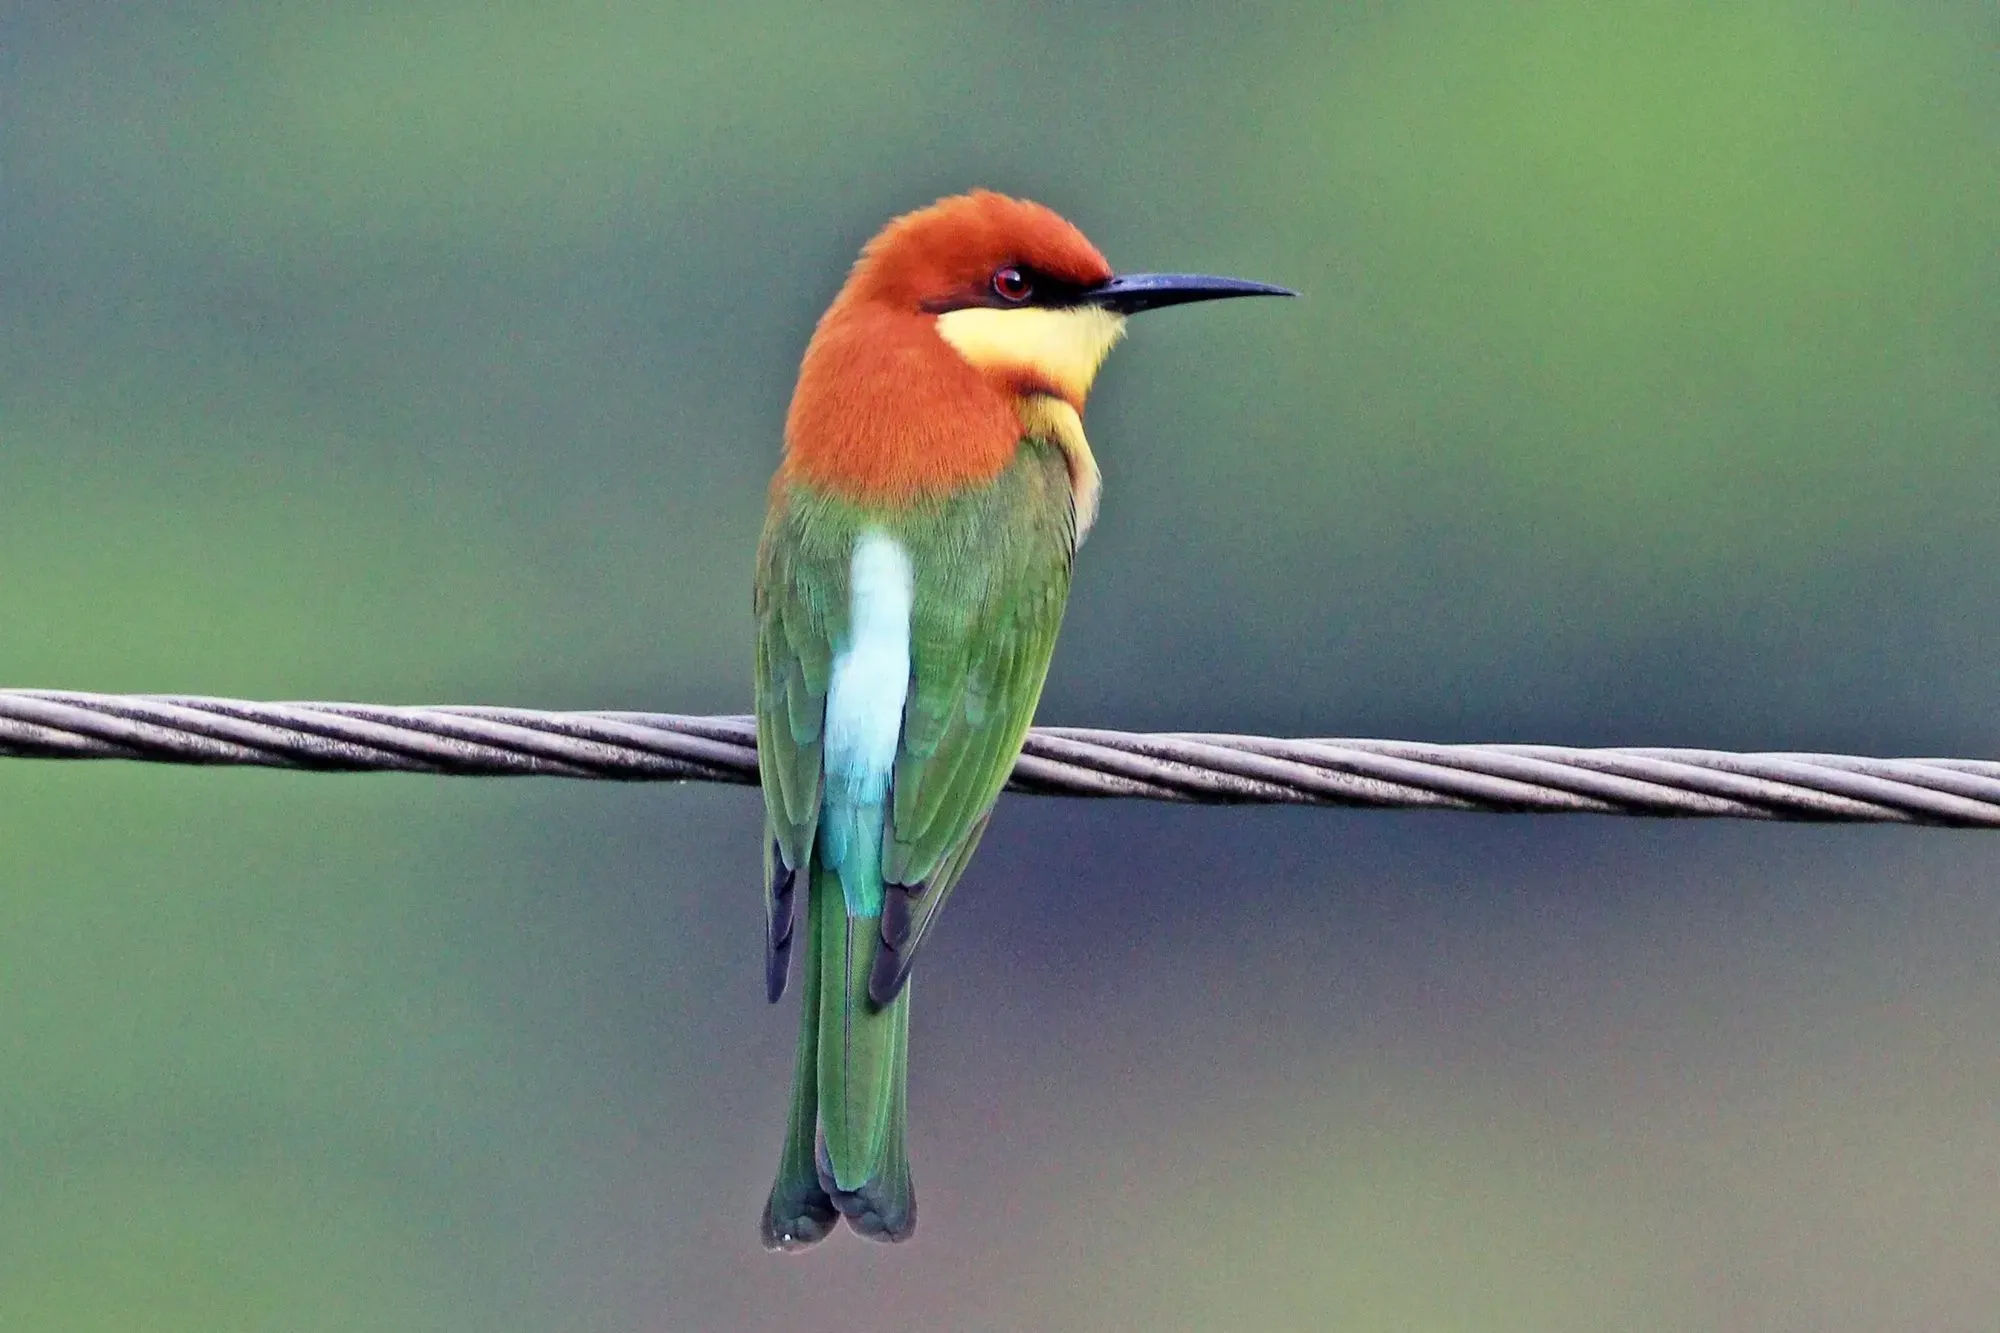 Chestnut-headed bee-eaters charge directly towards prey and then catch the prey with their bill pointed forward.